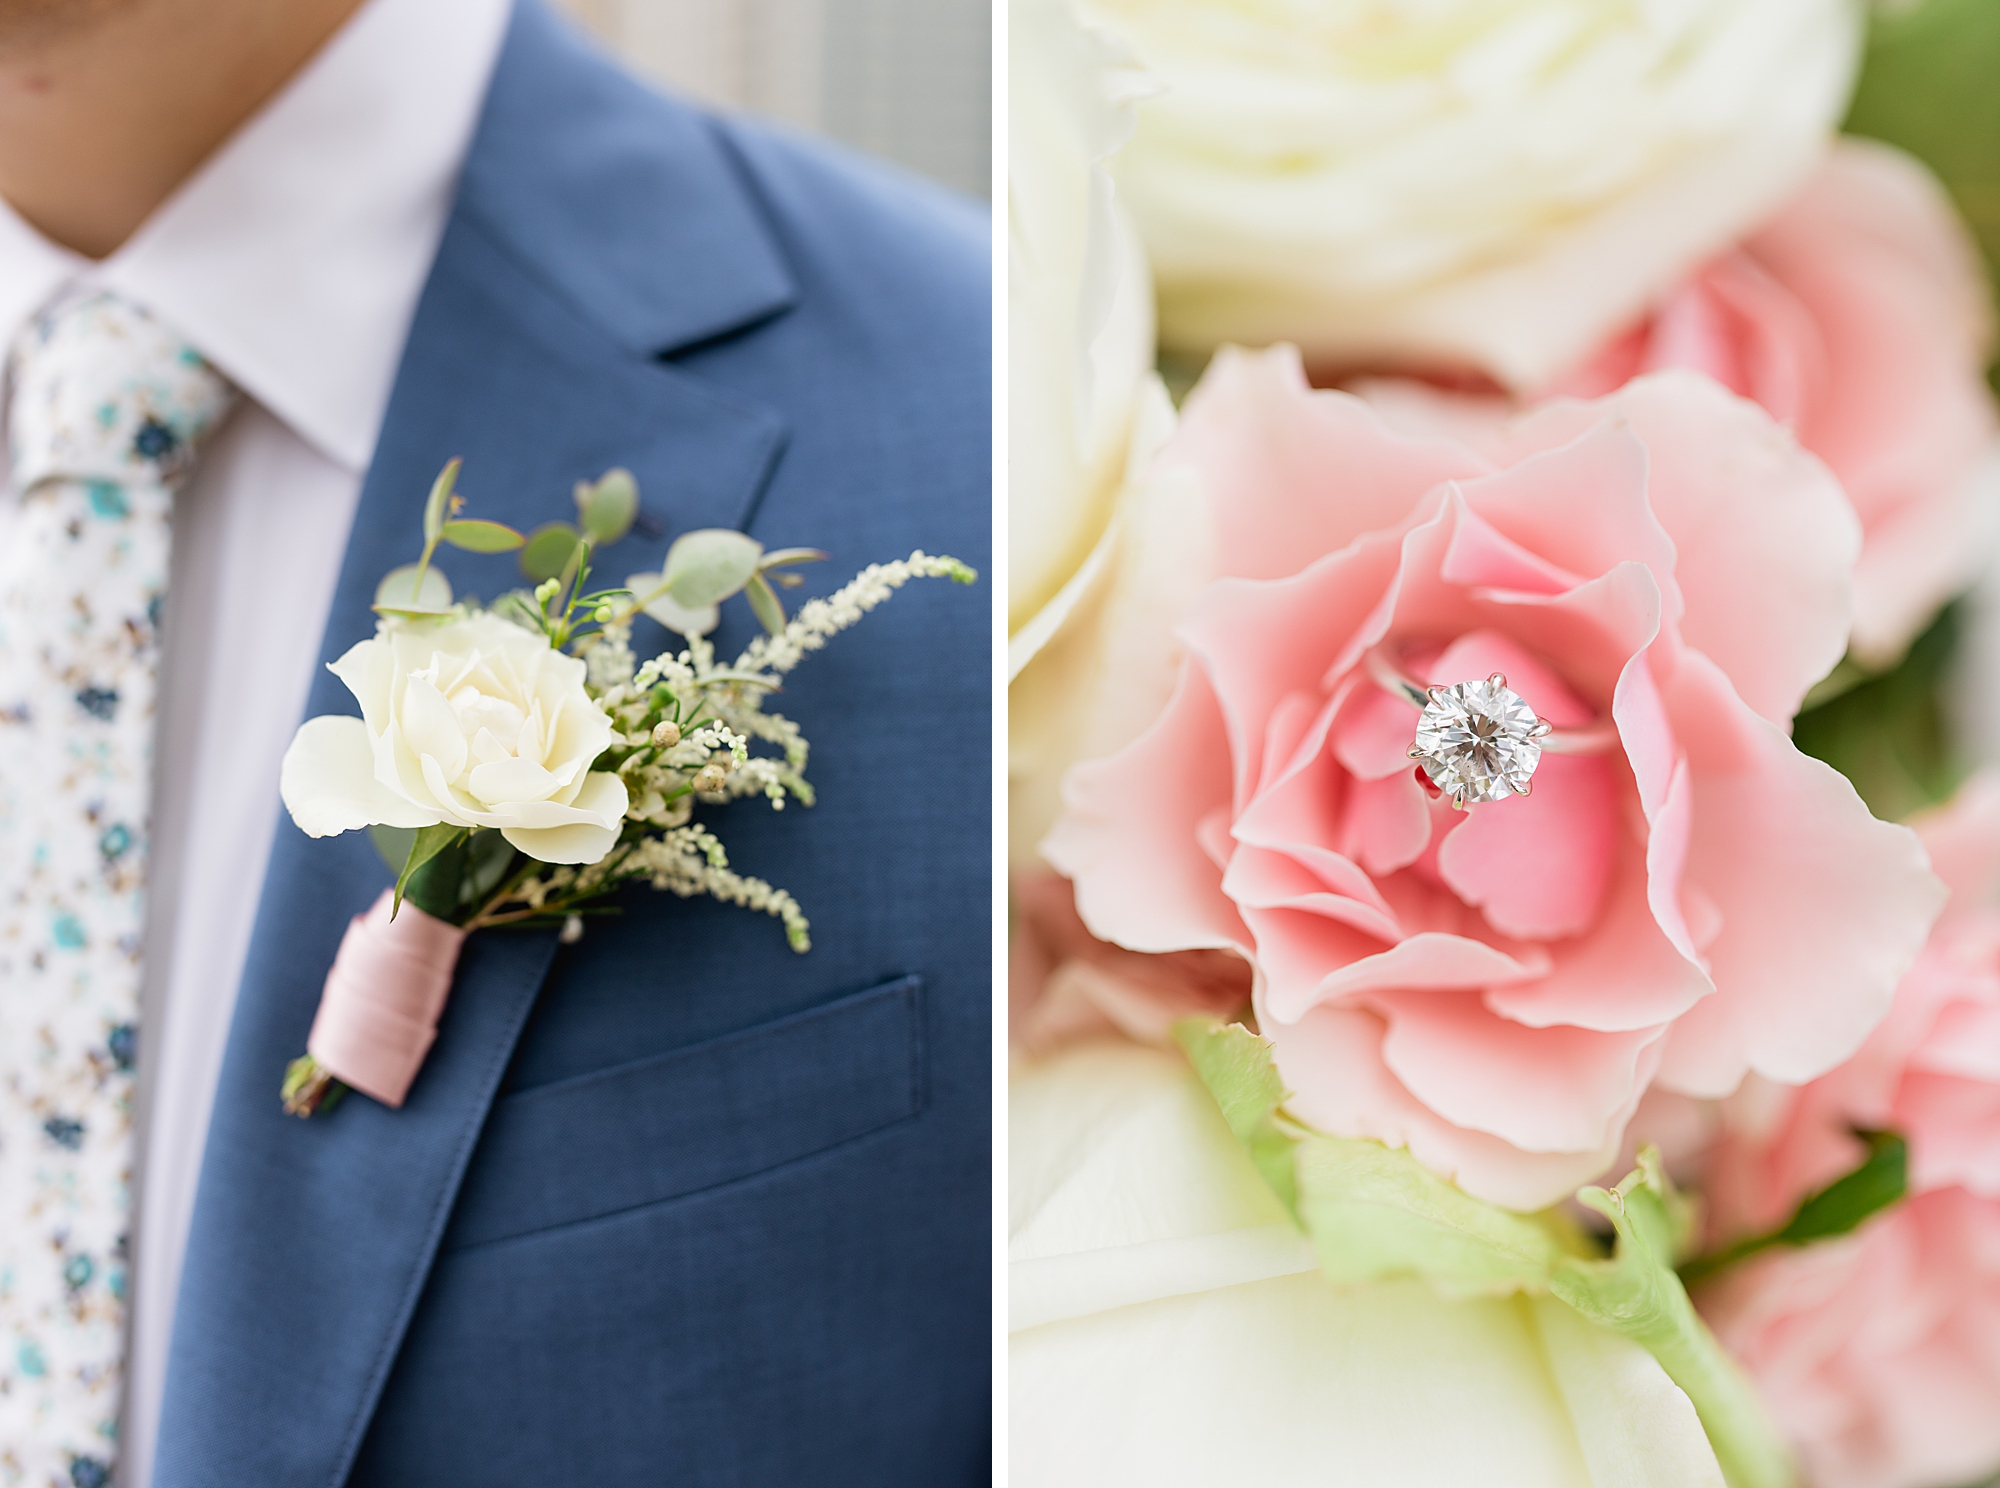 A chic downtown Chicago elopement and Chicago, IL micro wedding by Breanne Rochelle Photography.